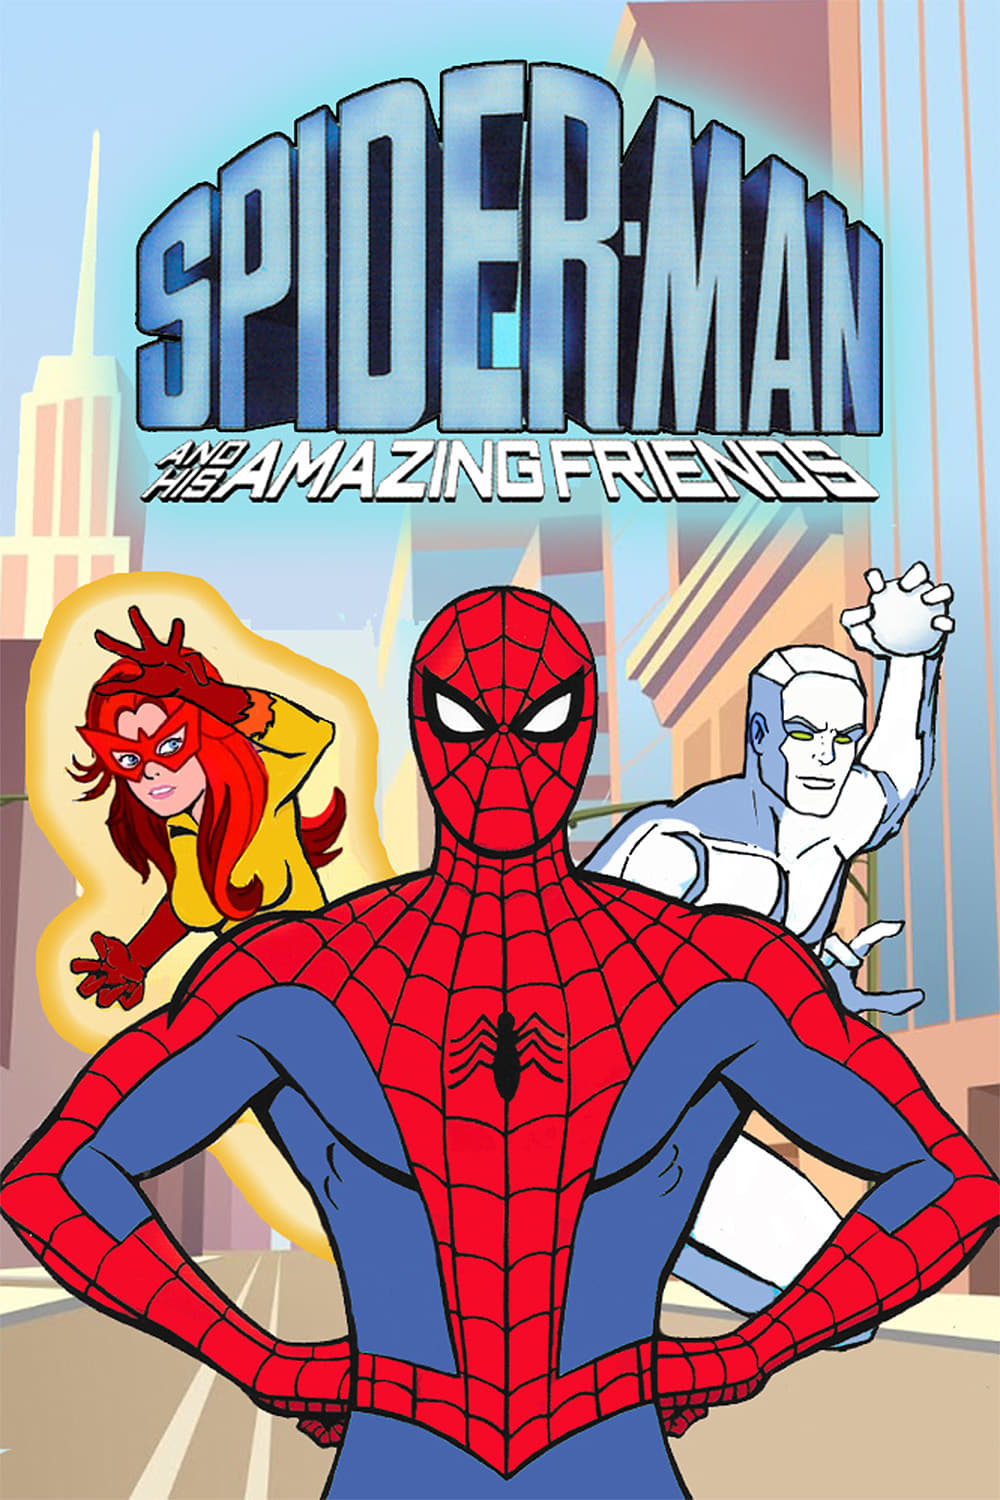 Spider-Man and His Amazing Friends (S01 - S03)